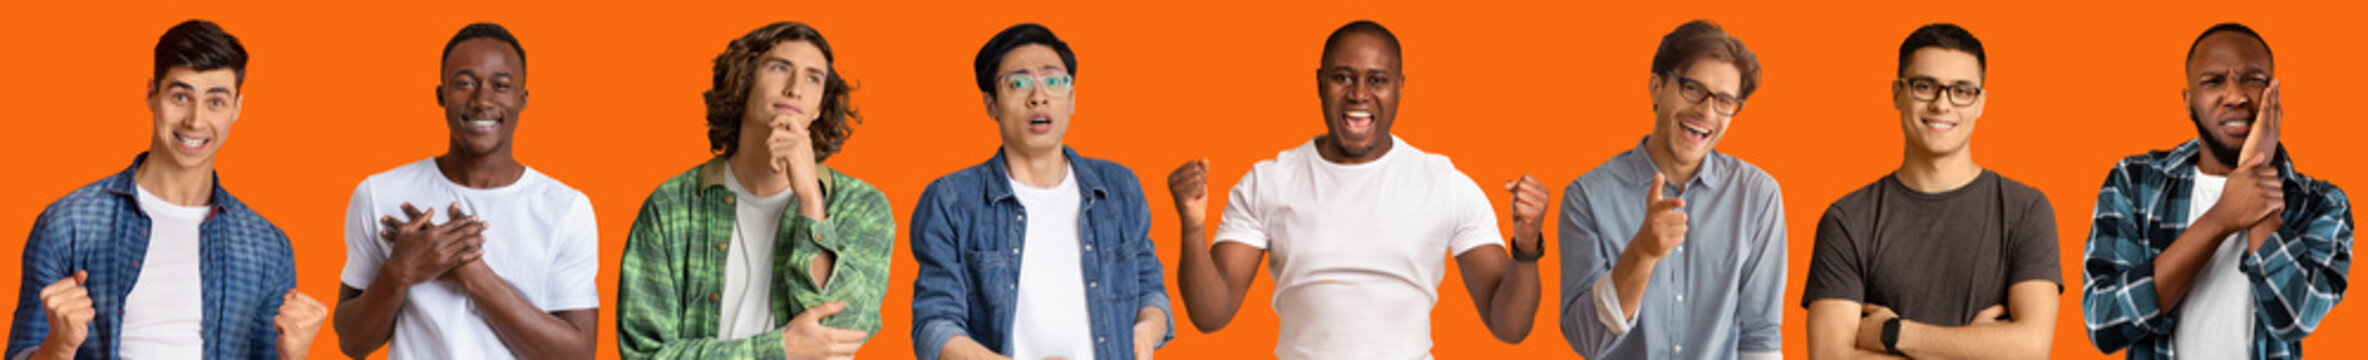 Emotional collection of photos, millennial guys showing emotions on orange